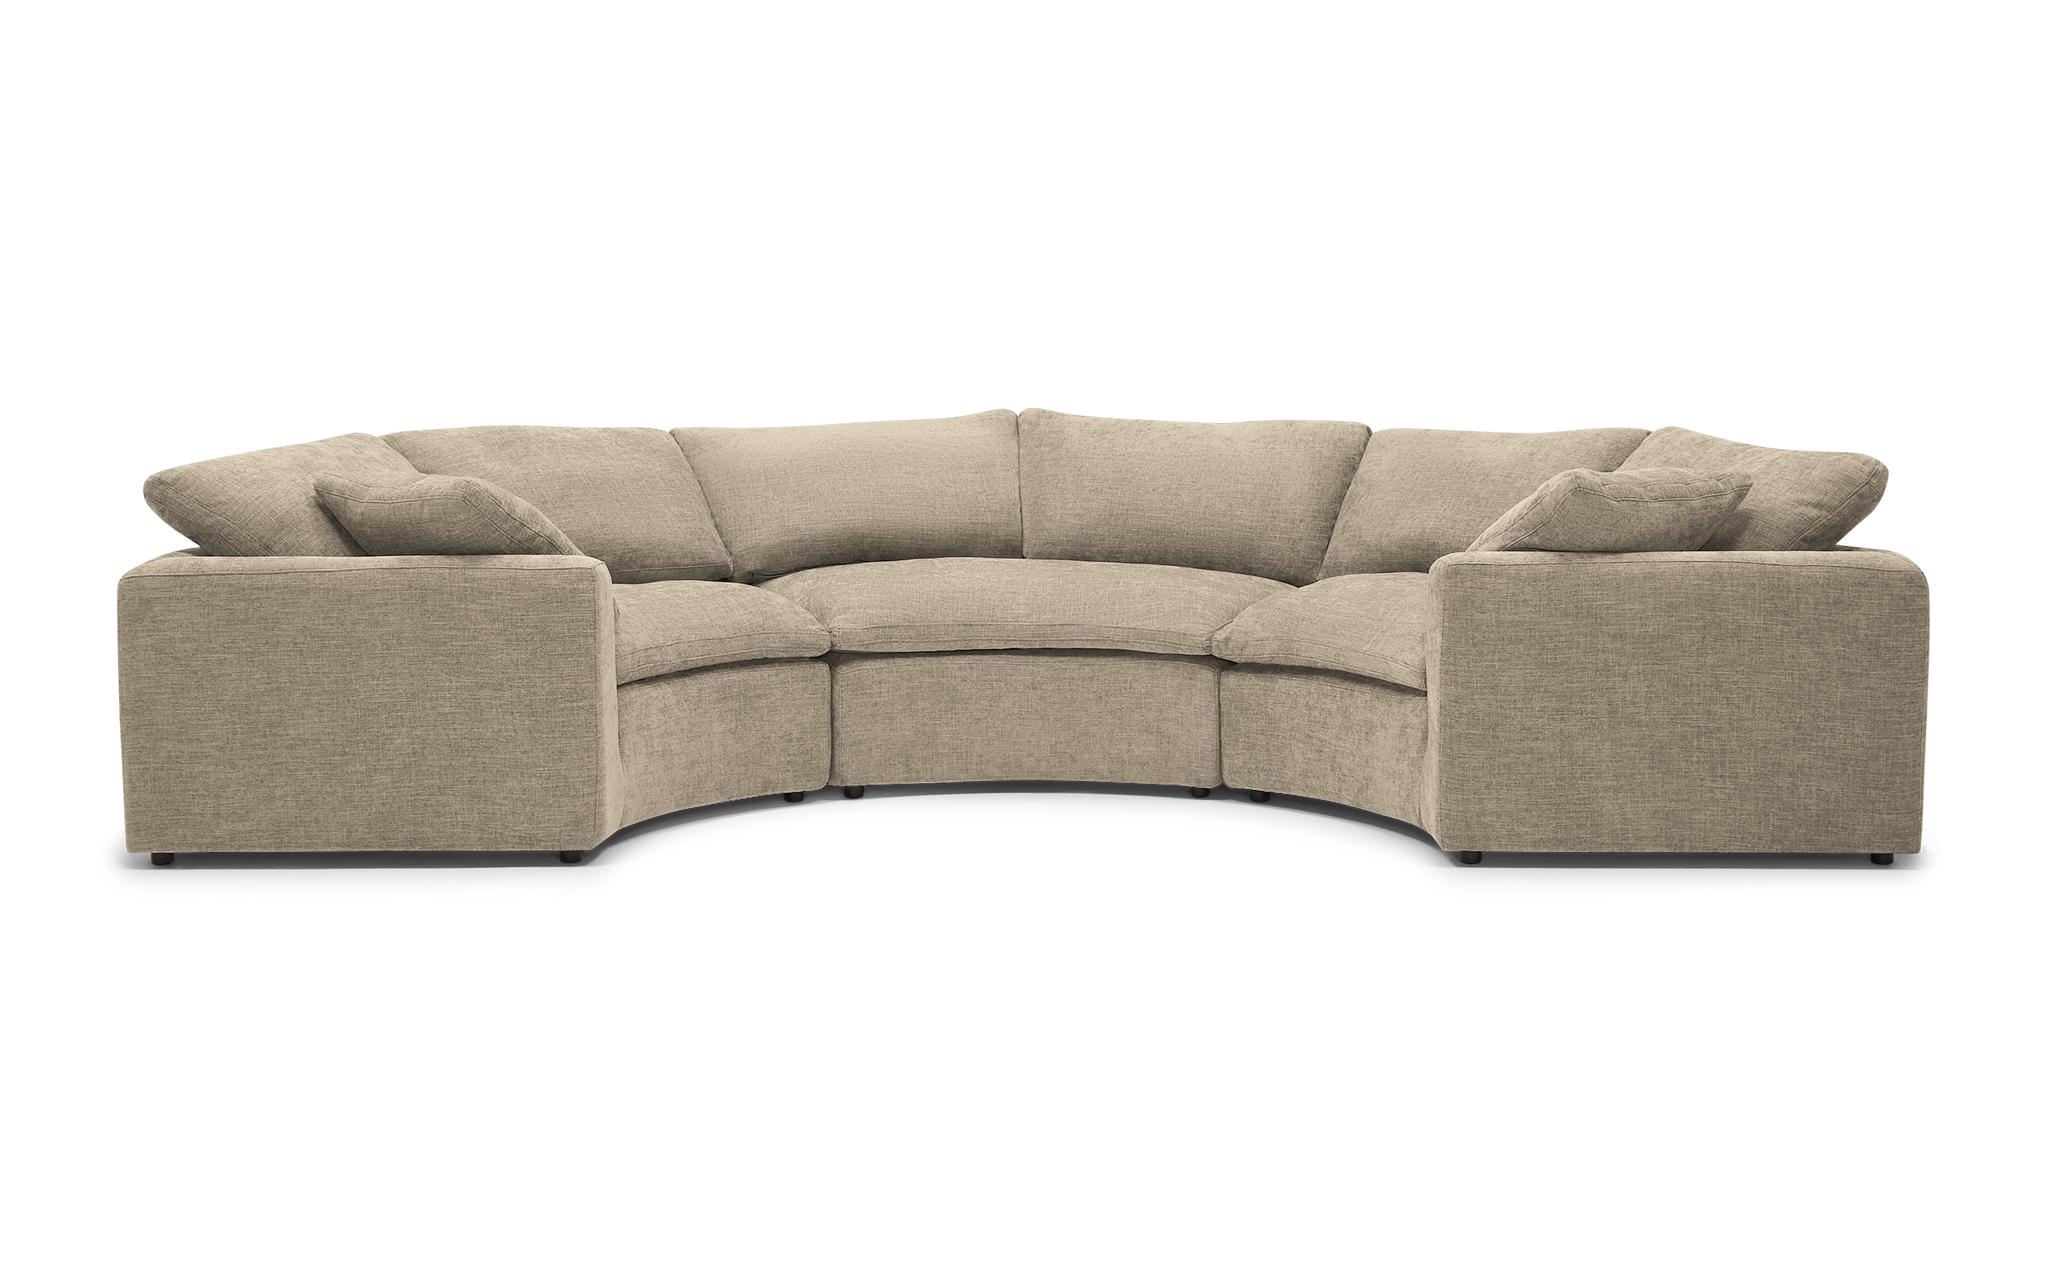 Beige/White Bryant Mid Century Modern Semicircle Sectional (3 Piece) - Cody Sandstone - Image 0